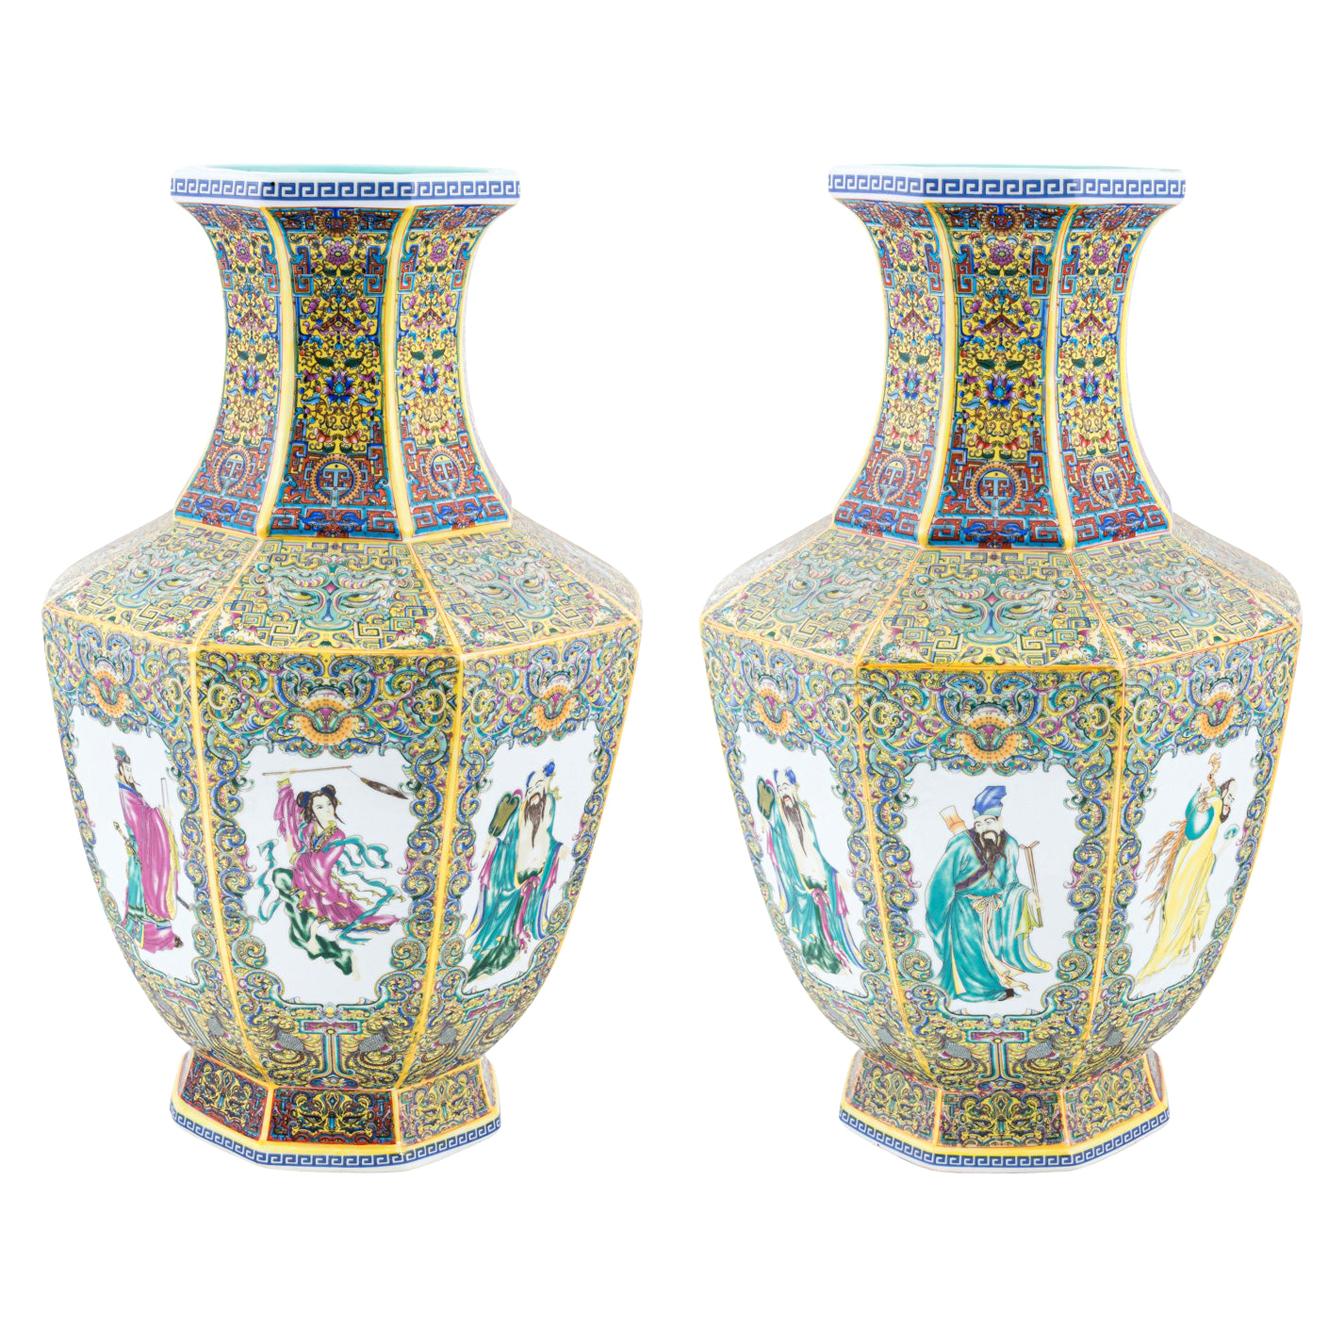 Pair of Octagonal Multicolored Chinese Vases